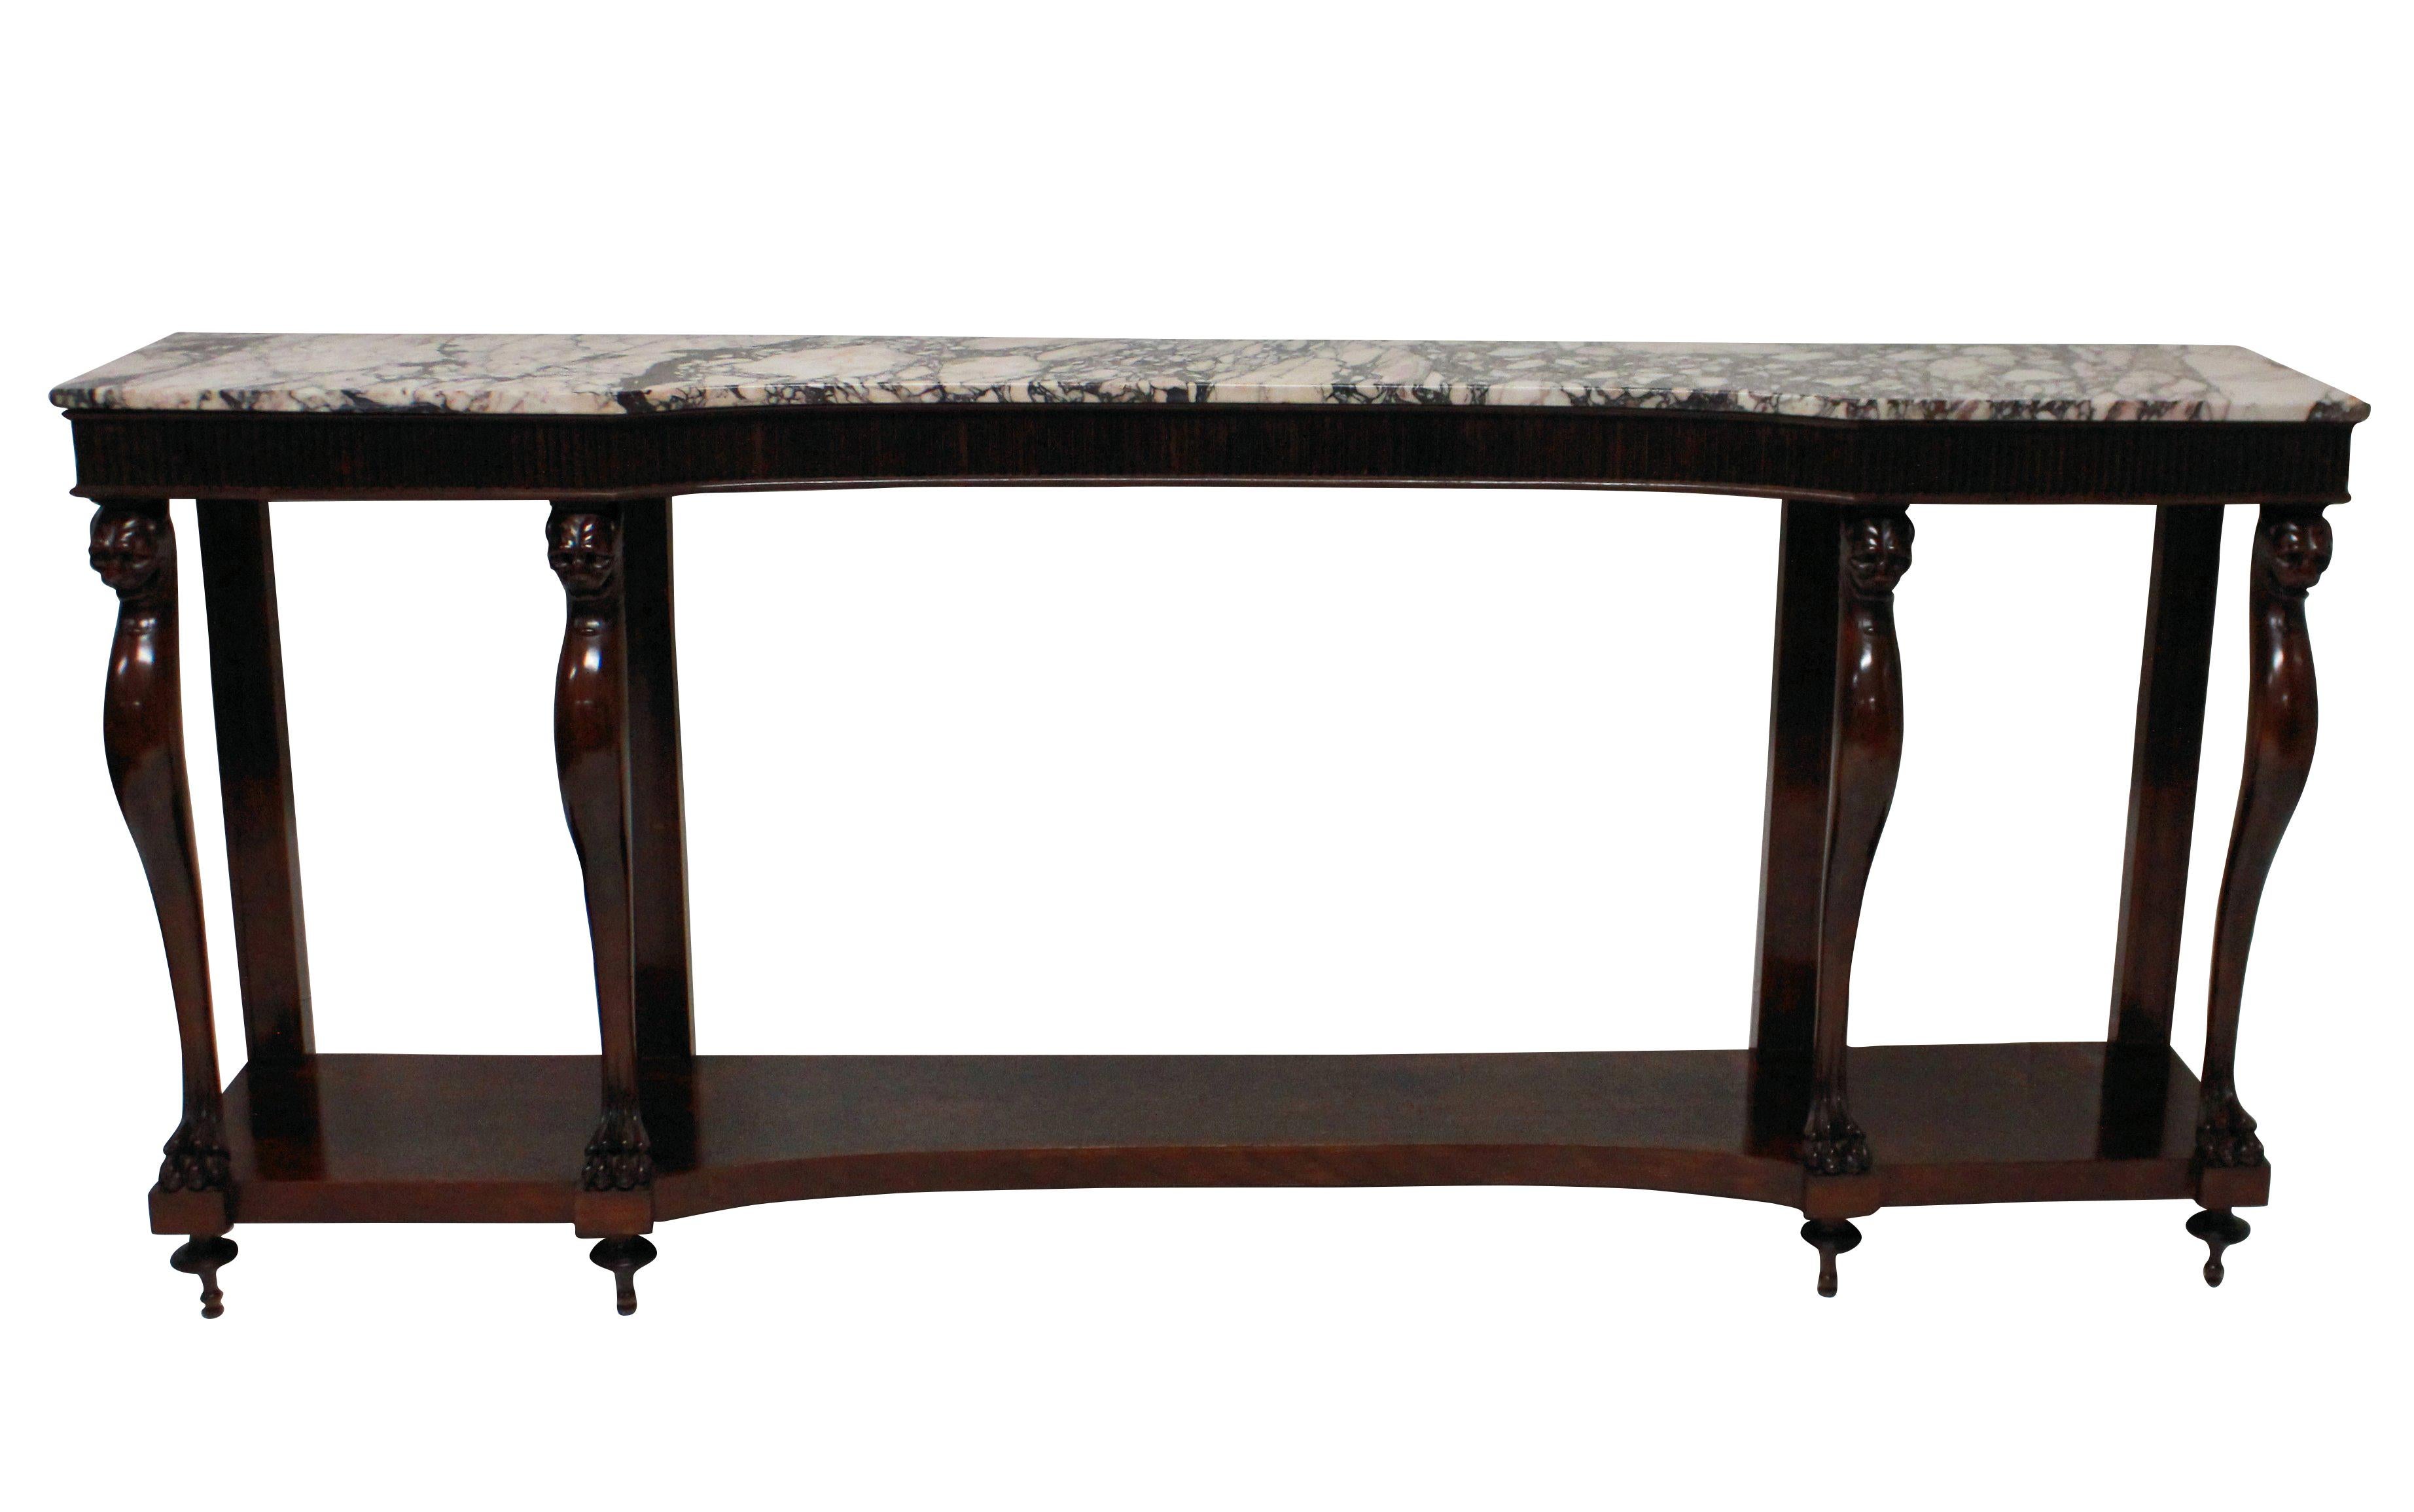 Mahogany Monumental Italian Neoclassical Marble-Top Console Table